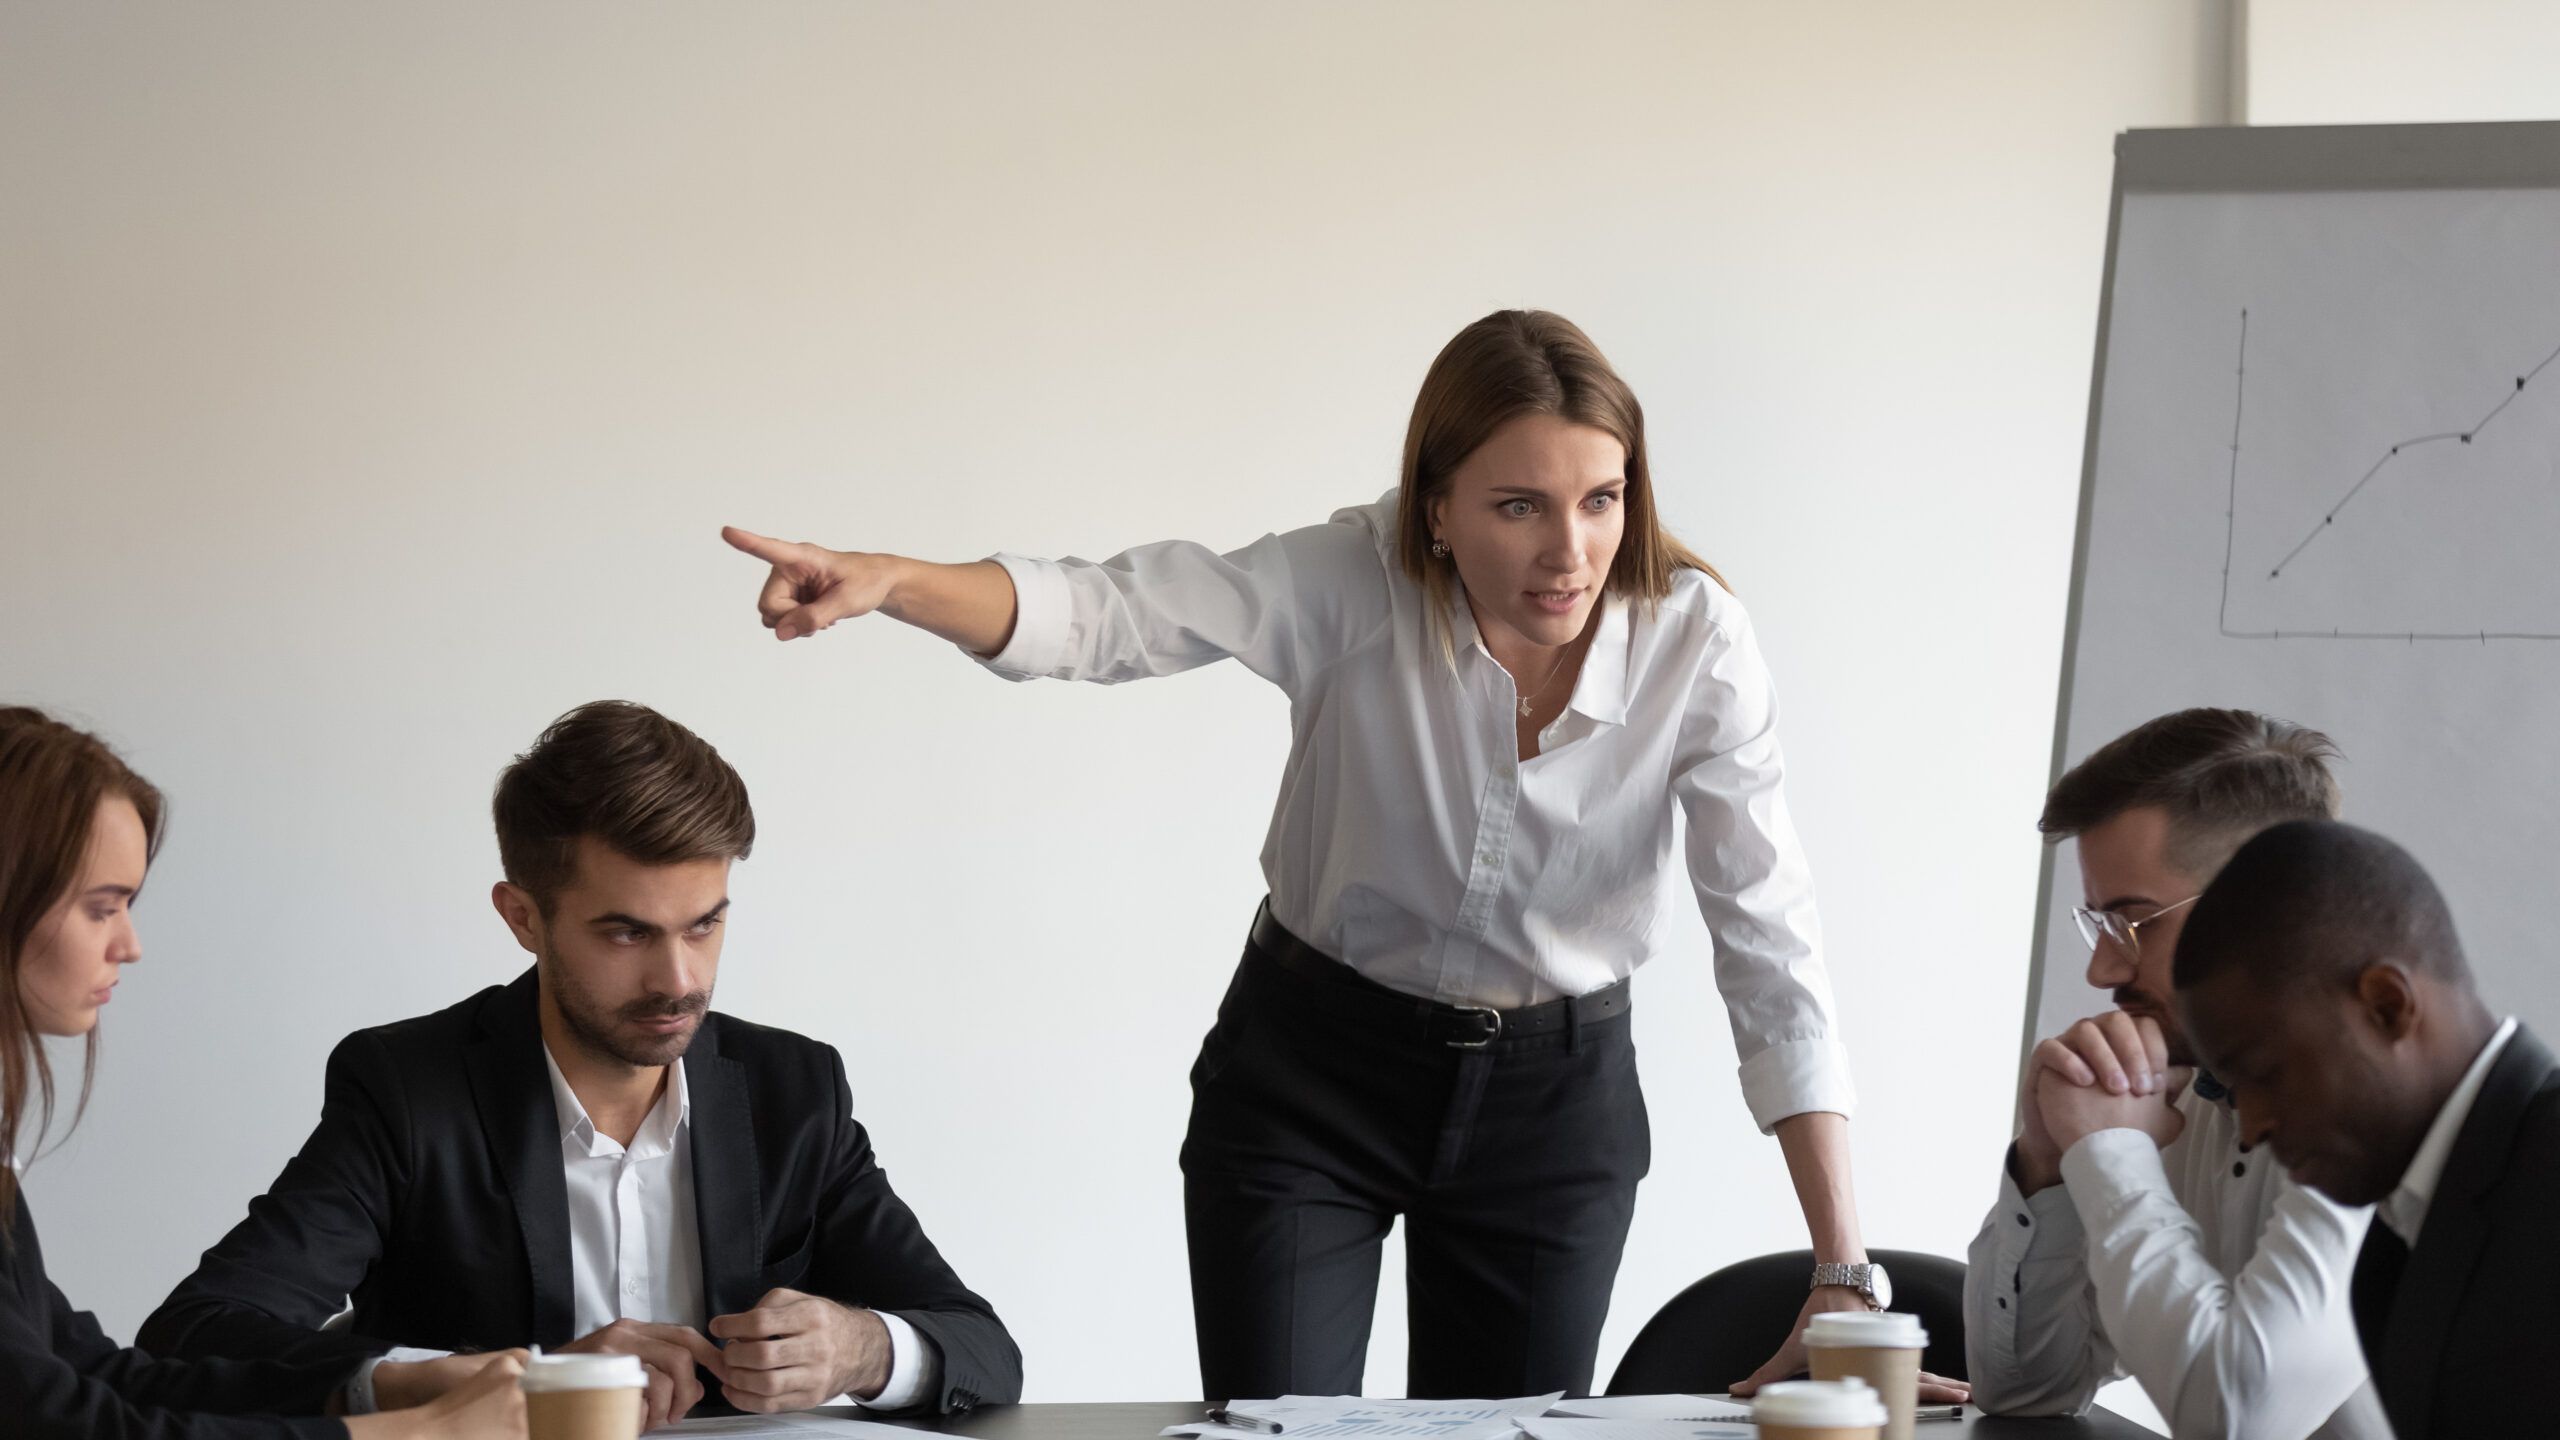 The latest World Risk Poll reveals that Australia and New Zealand have the highest rates of workplace bullying, with a staggering 47.9% of people experiencing some form of harassment during their career. Credit: Shutterstock.